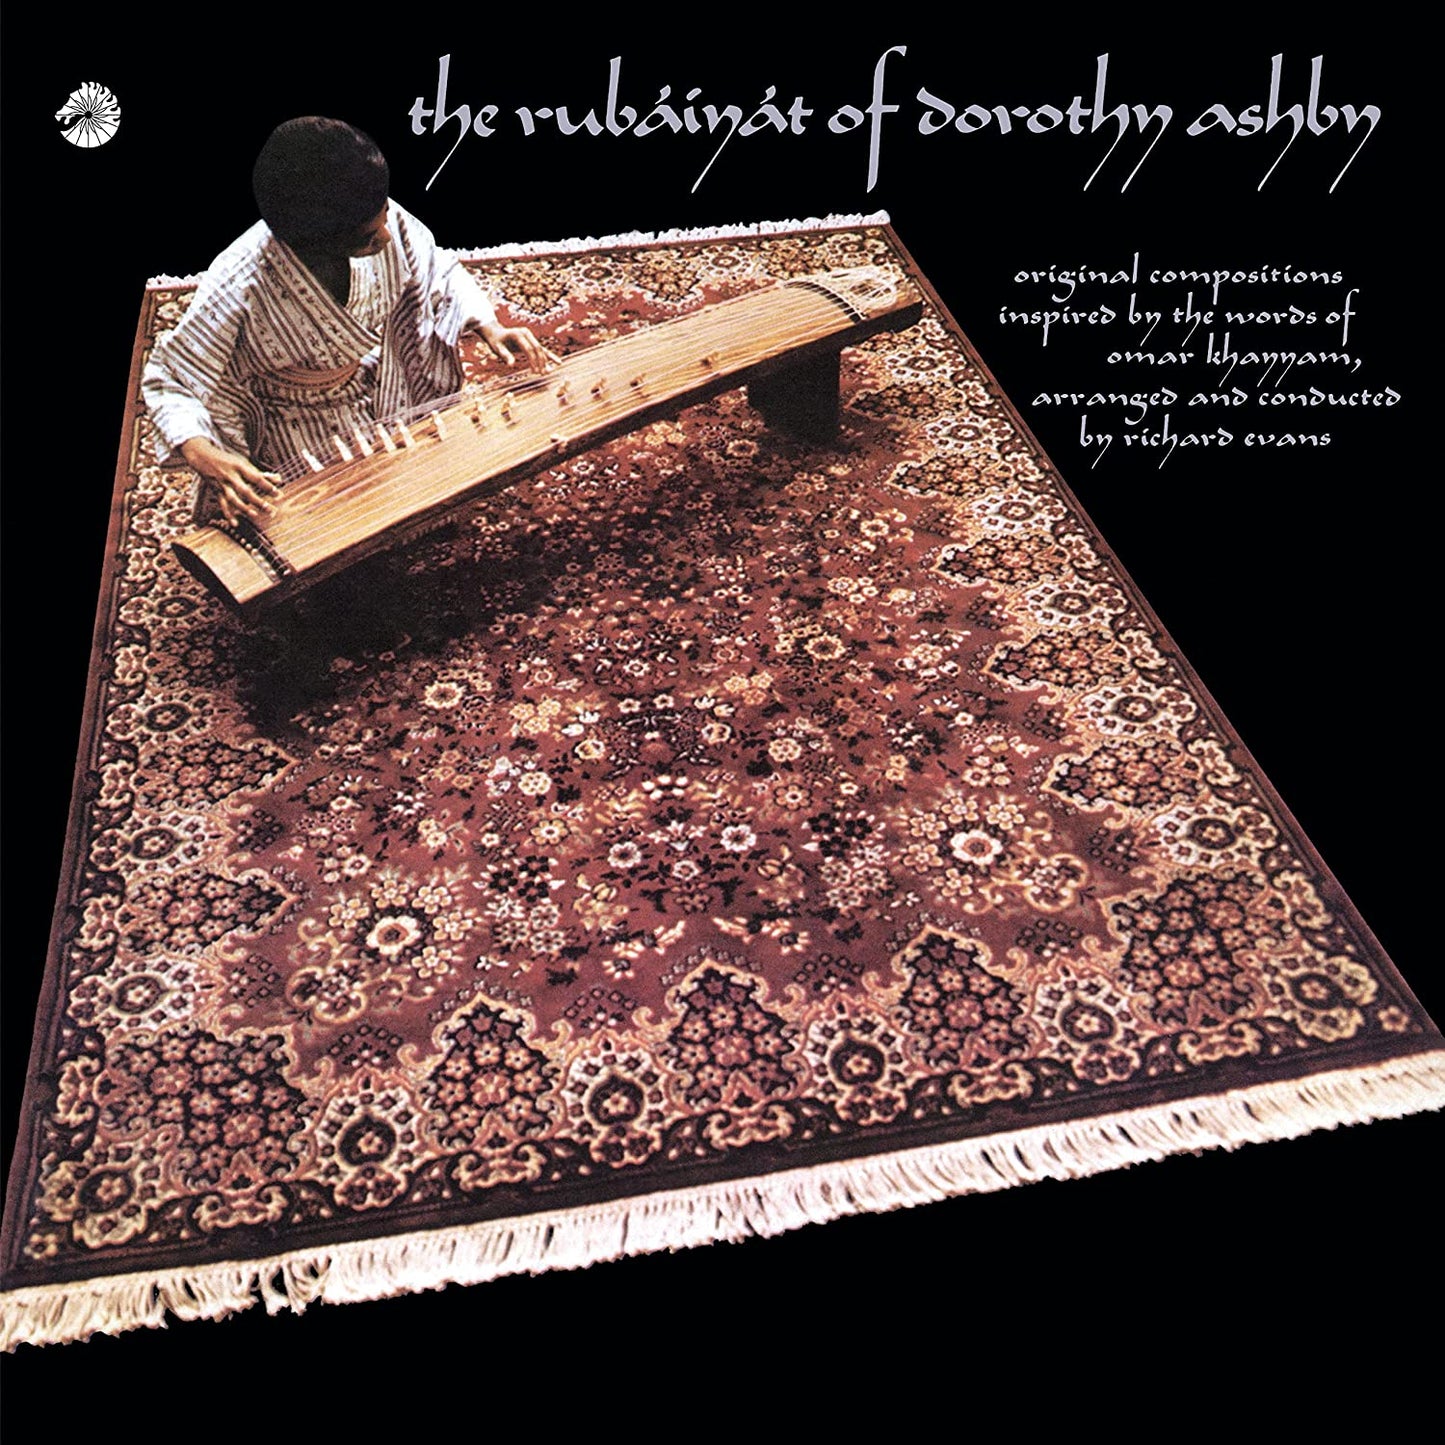 Dorothy Ashby - The Rubaiyat Of Dorothy Ashby (By Request) - LP